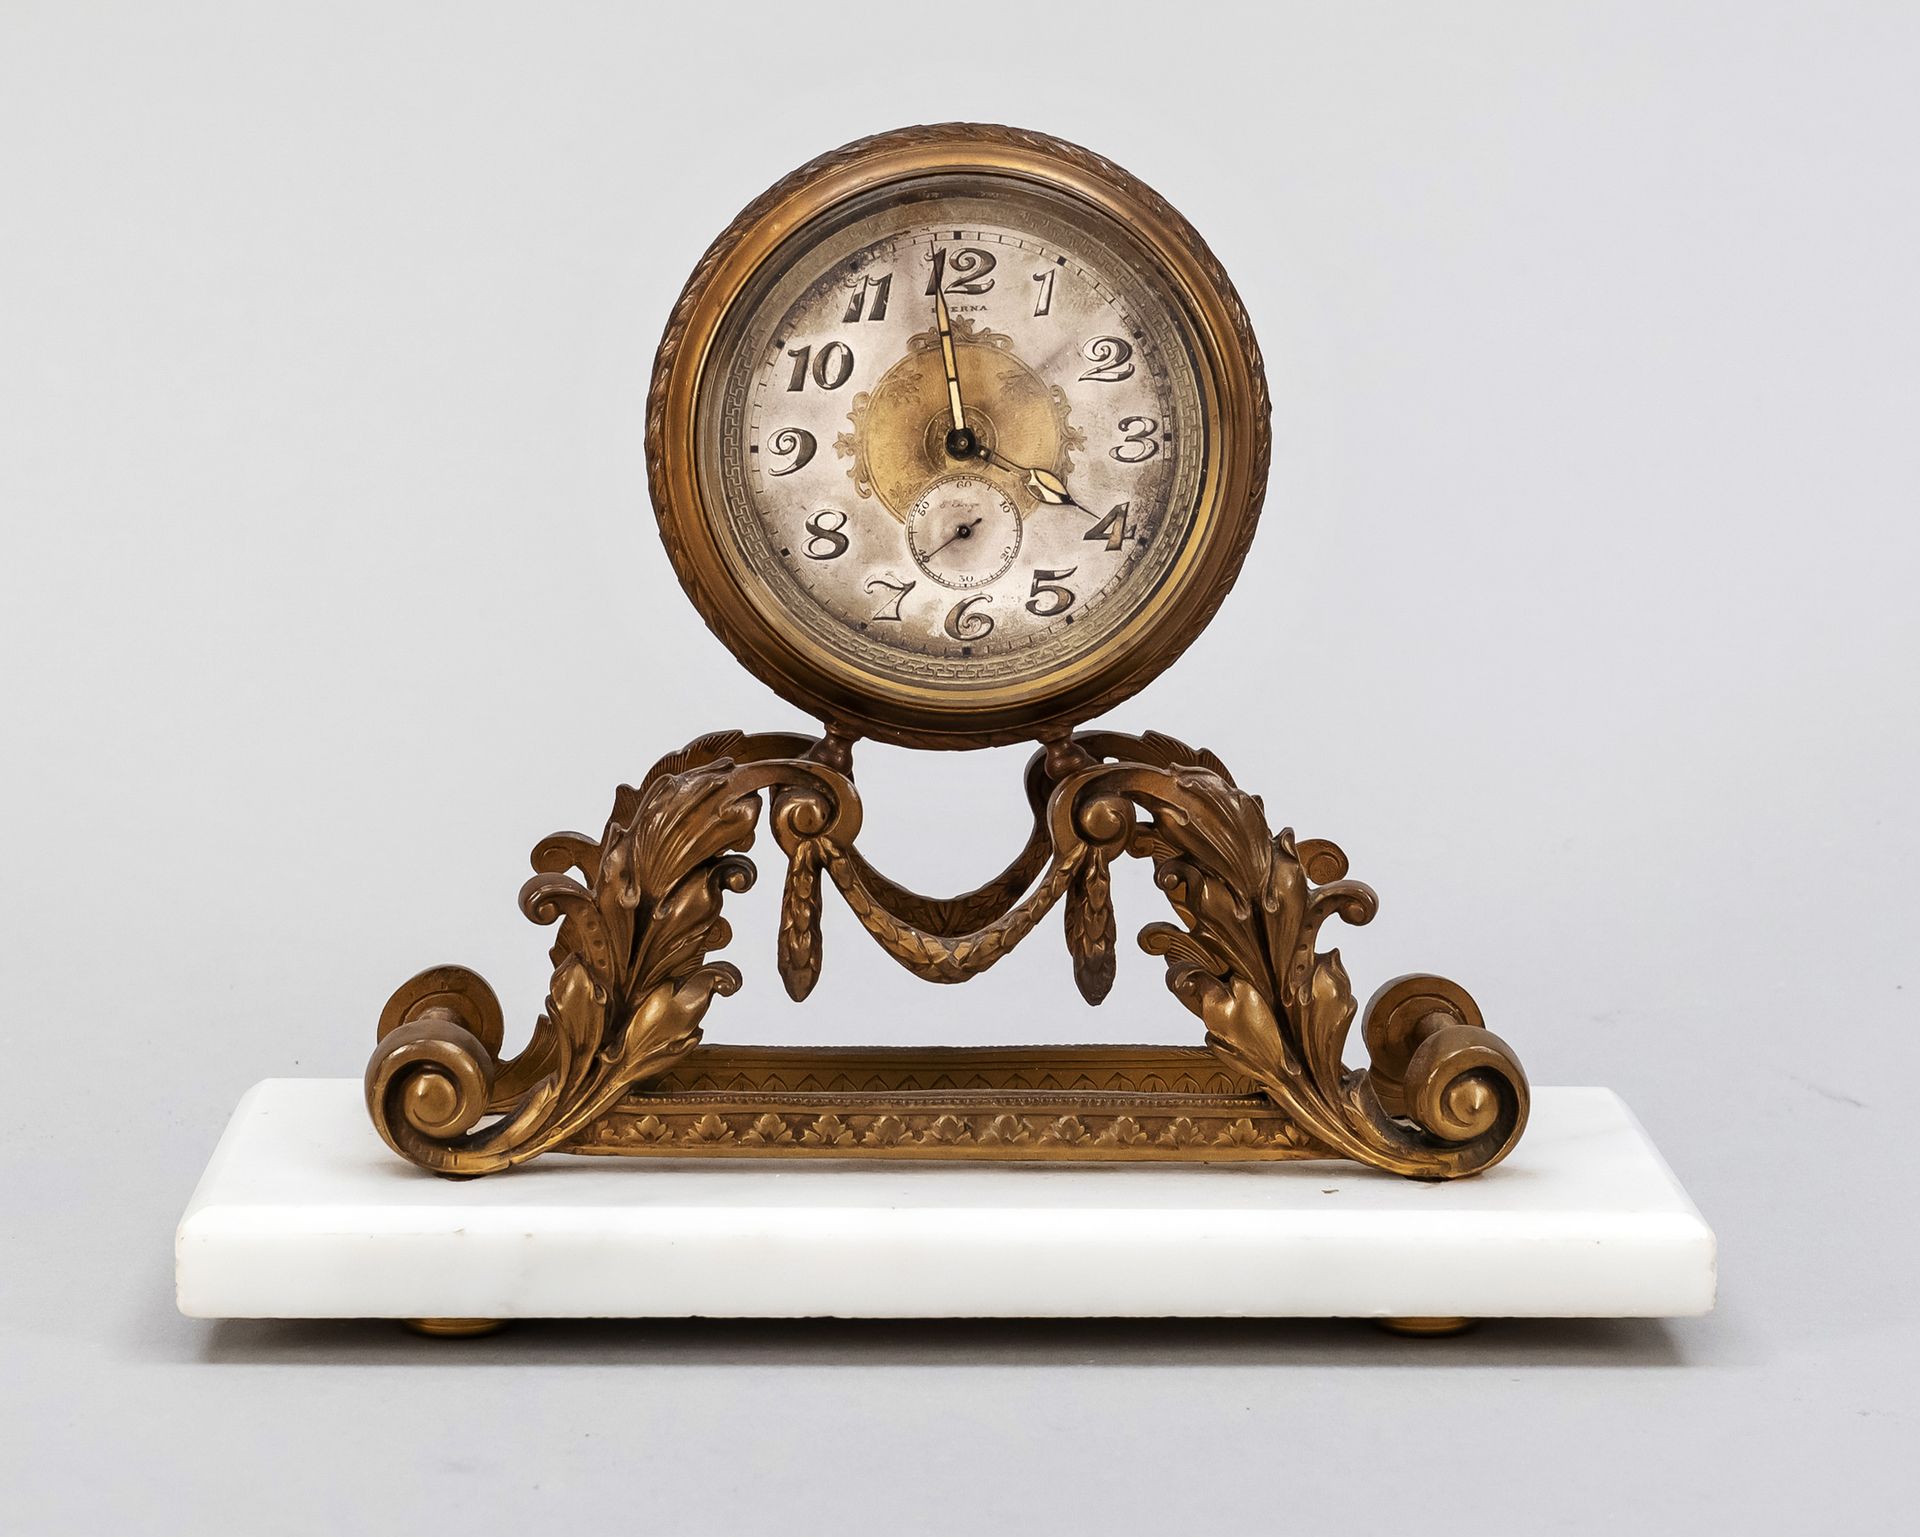 Null Eterna desk clock, around 1900, stand decorated with rocailles on white mar&hellip;